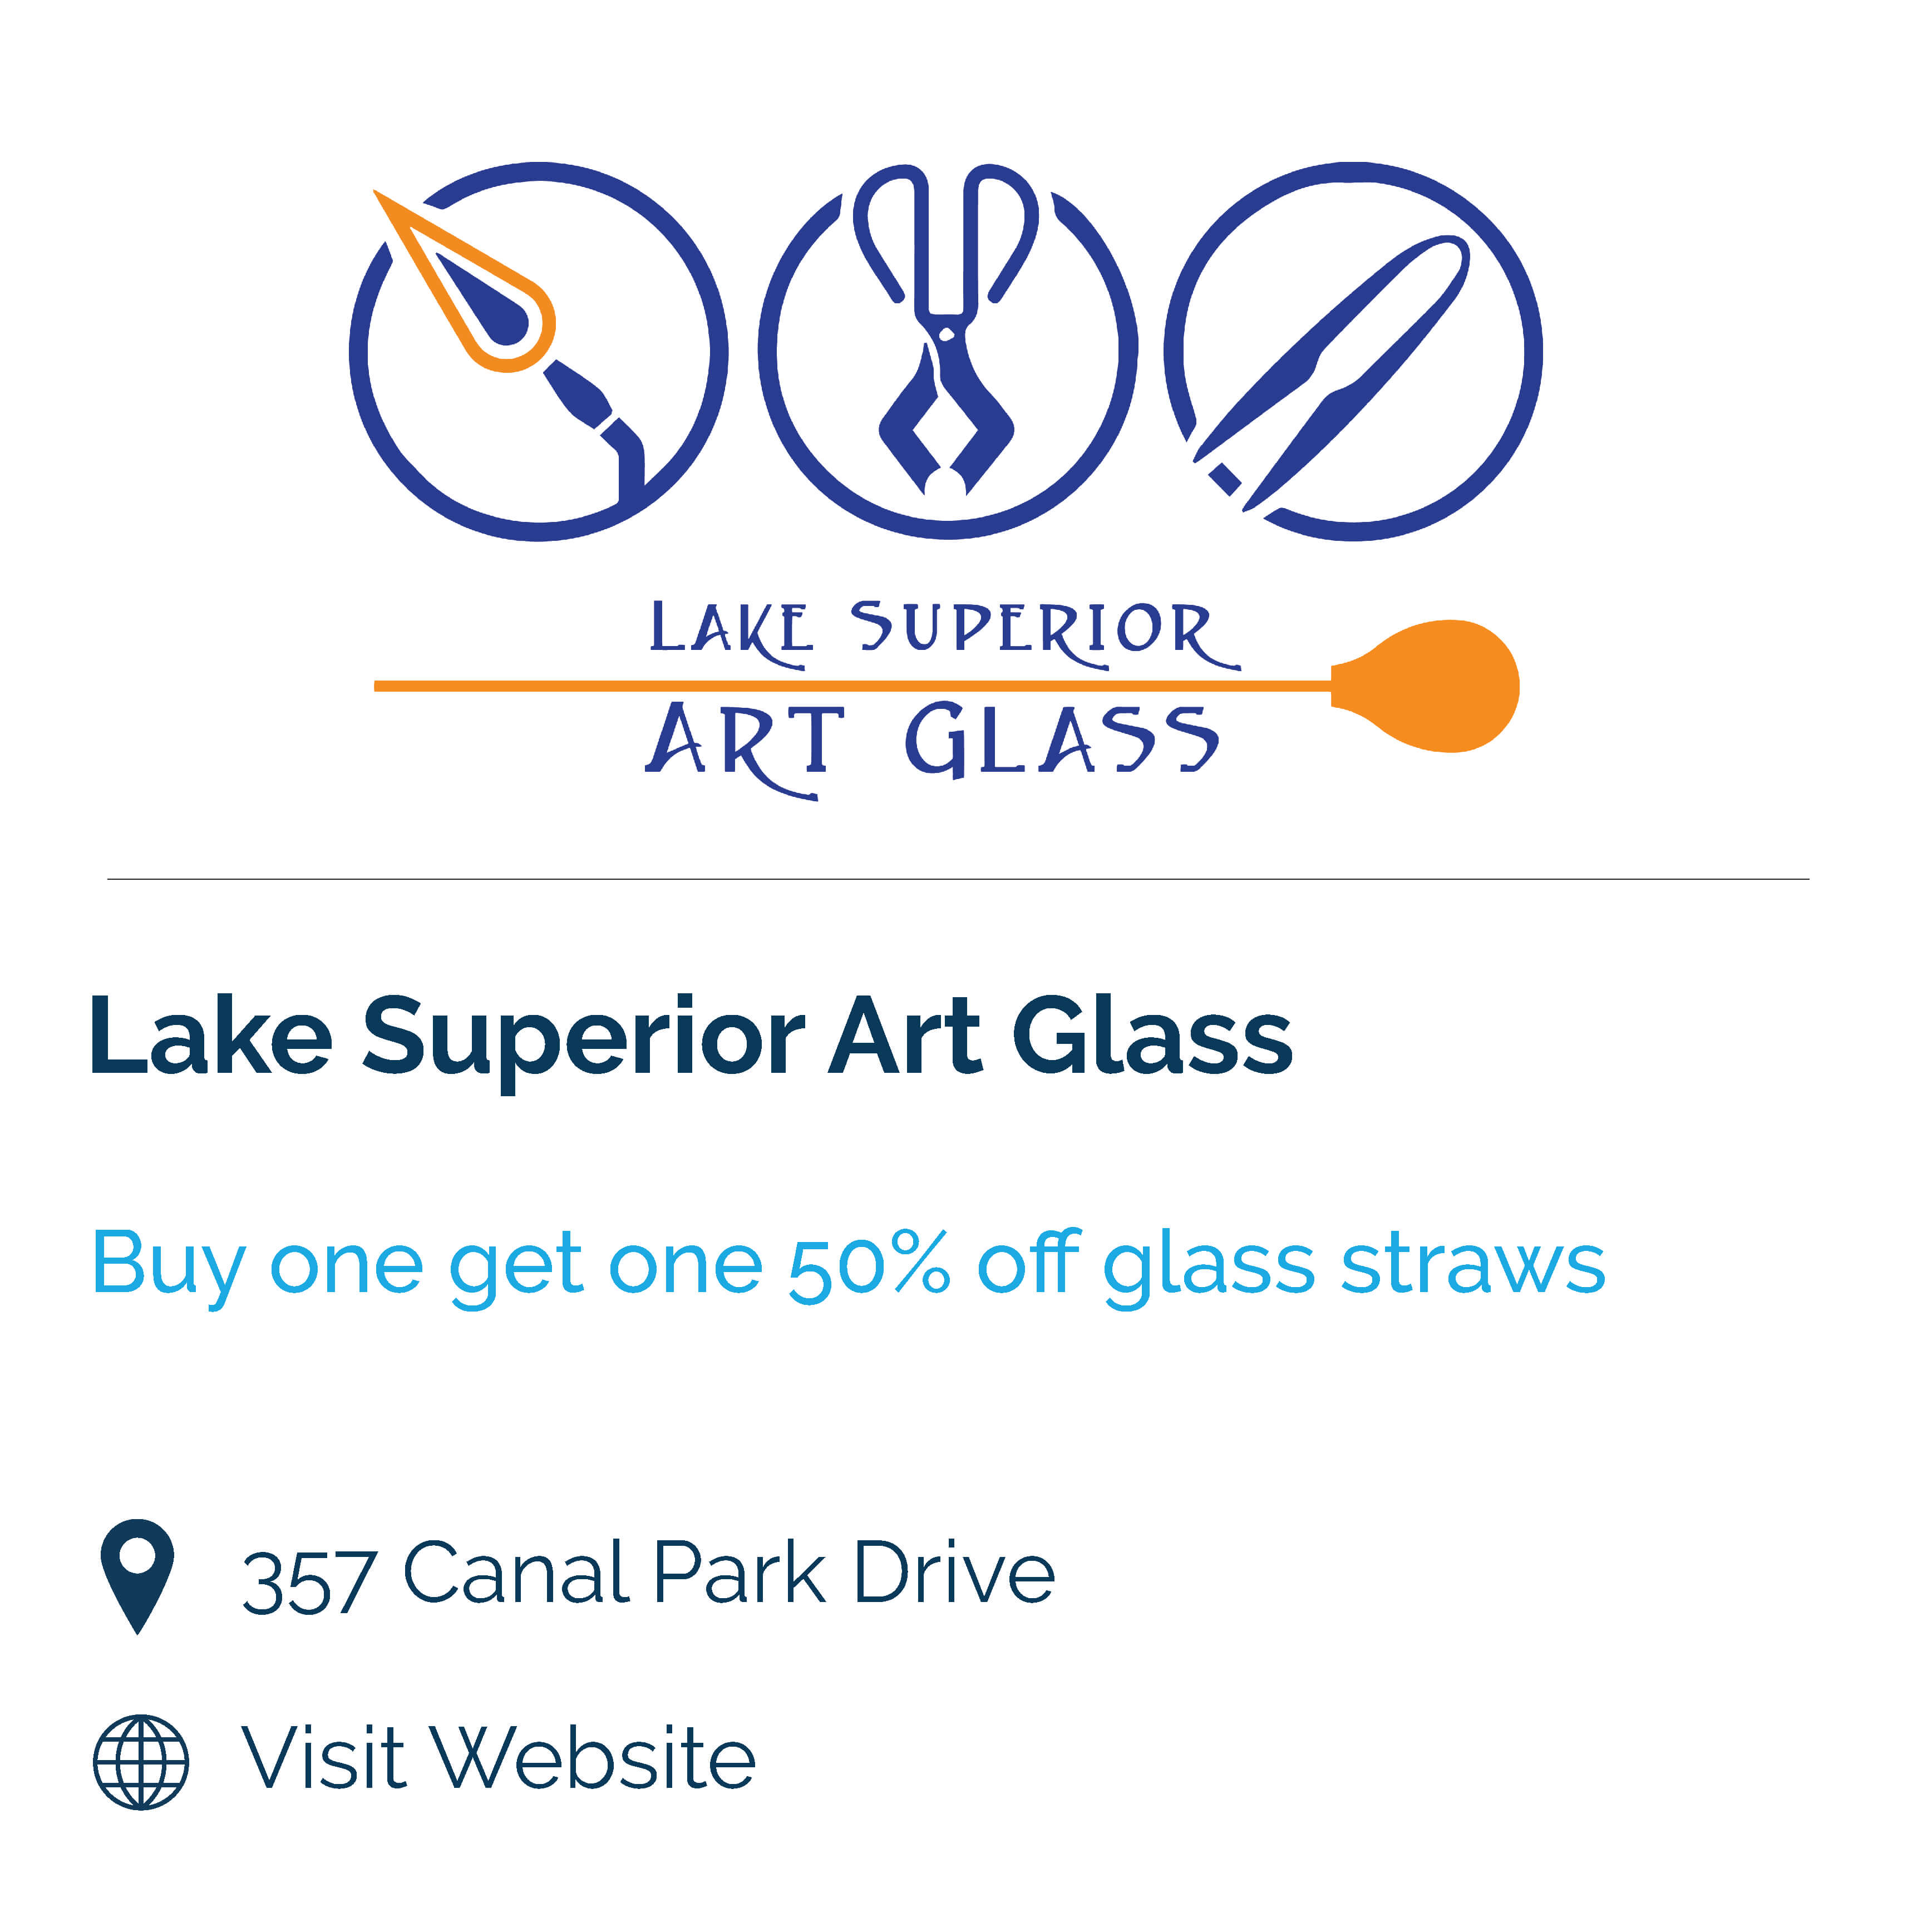 lake superior art glass. buy one get one 50% off glass straws. 357 canal park drive